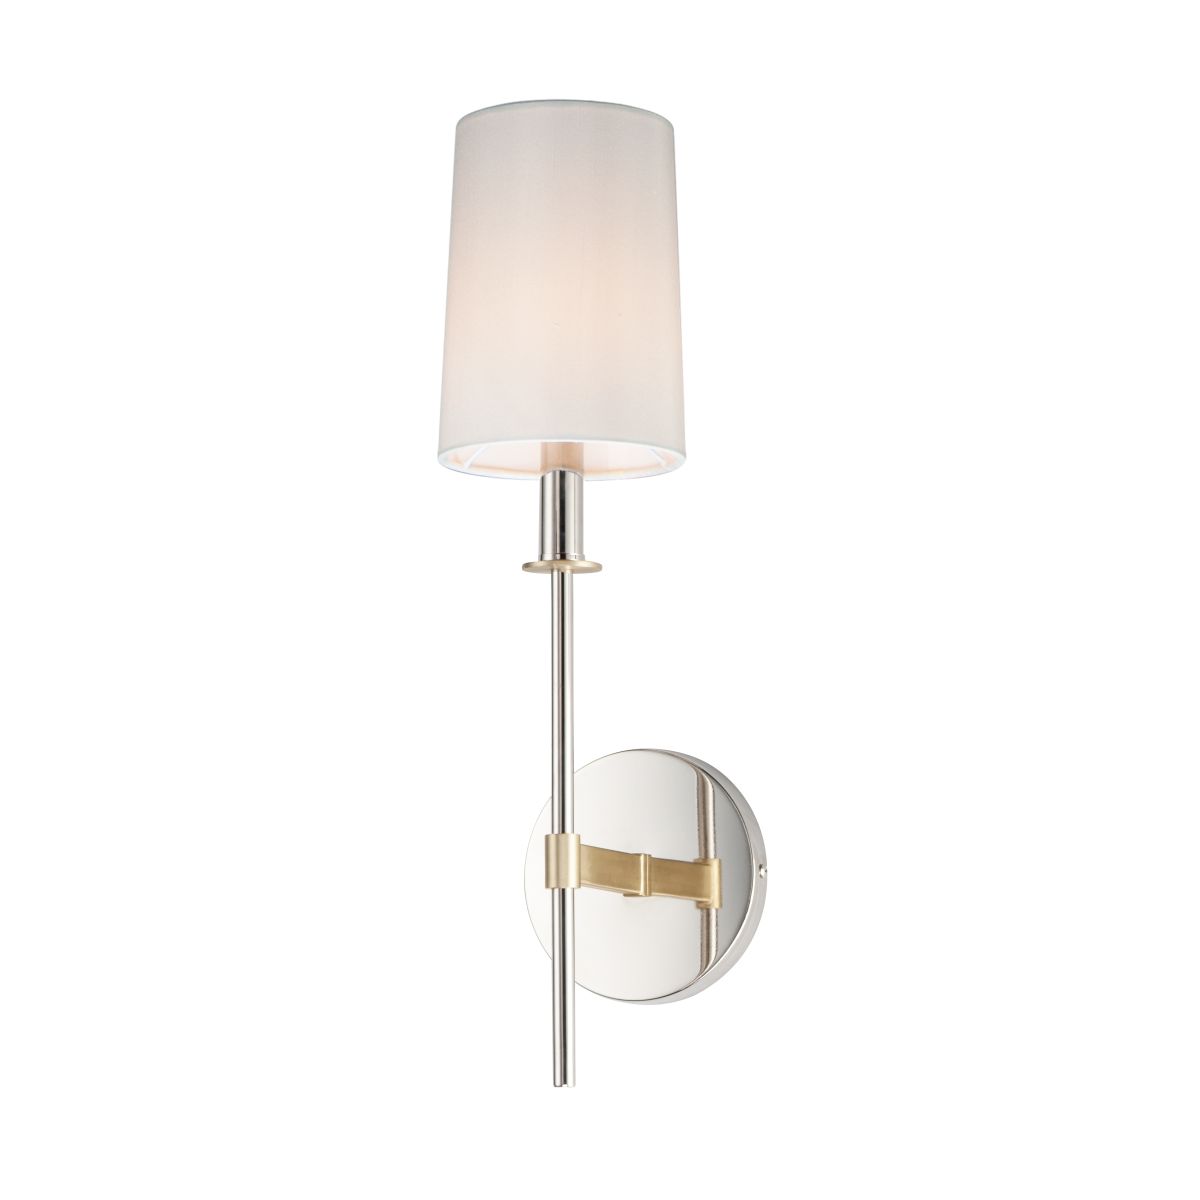 Uptown 20 in. Armed Sconce Polished Nickel finish